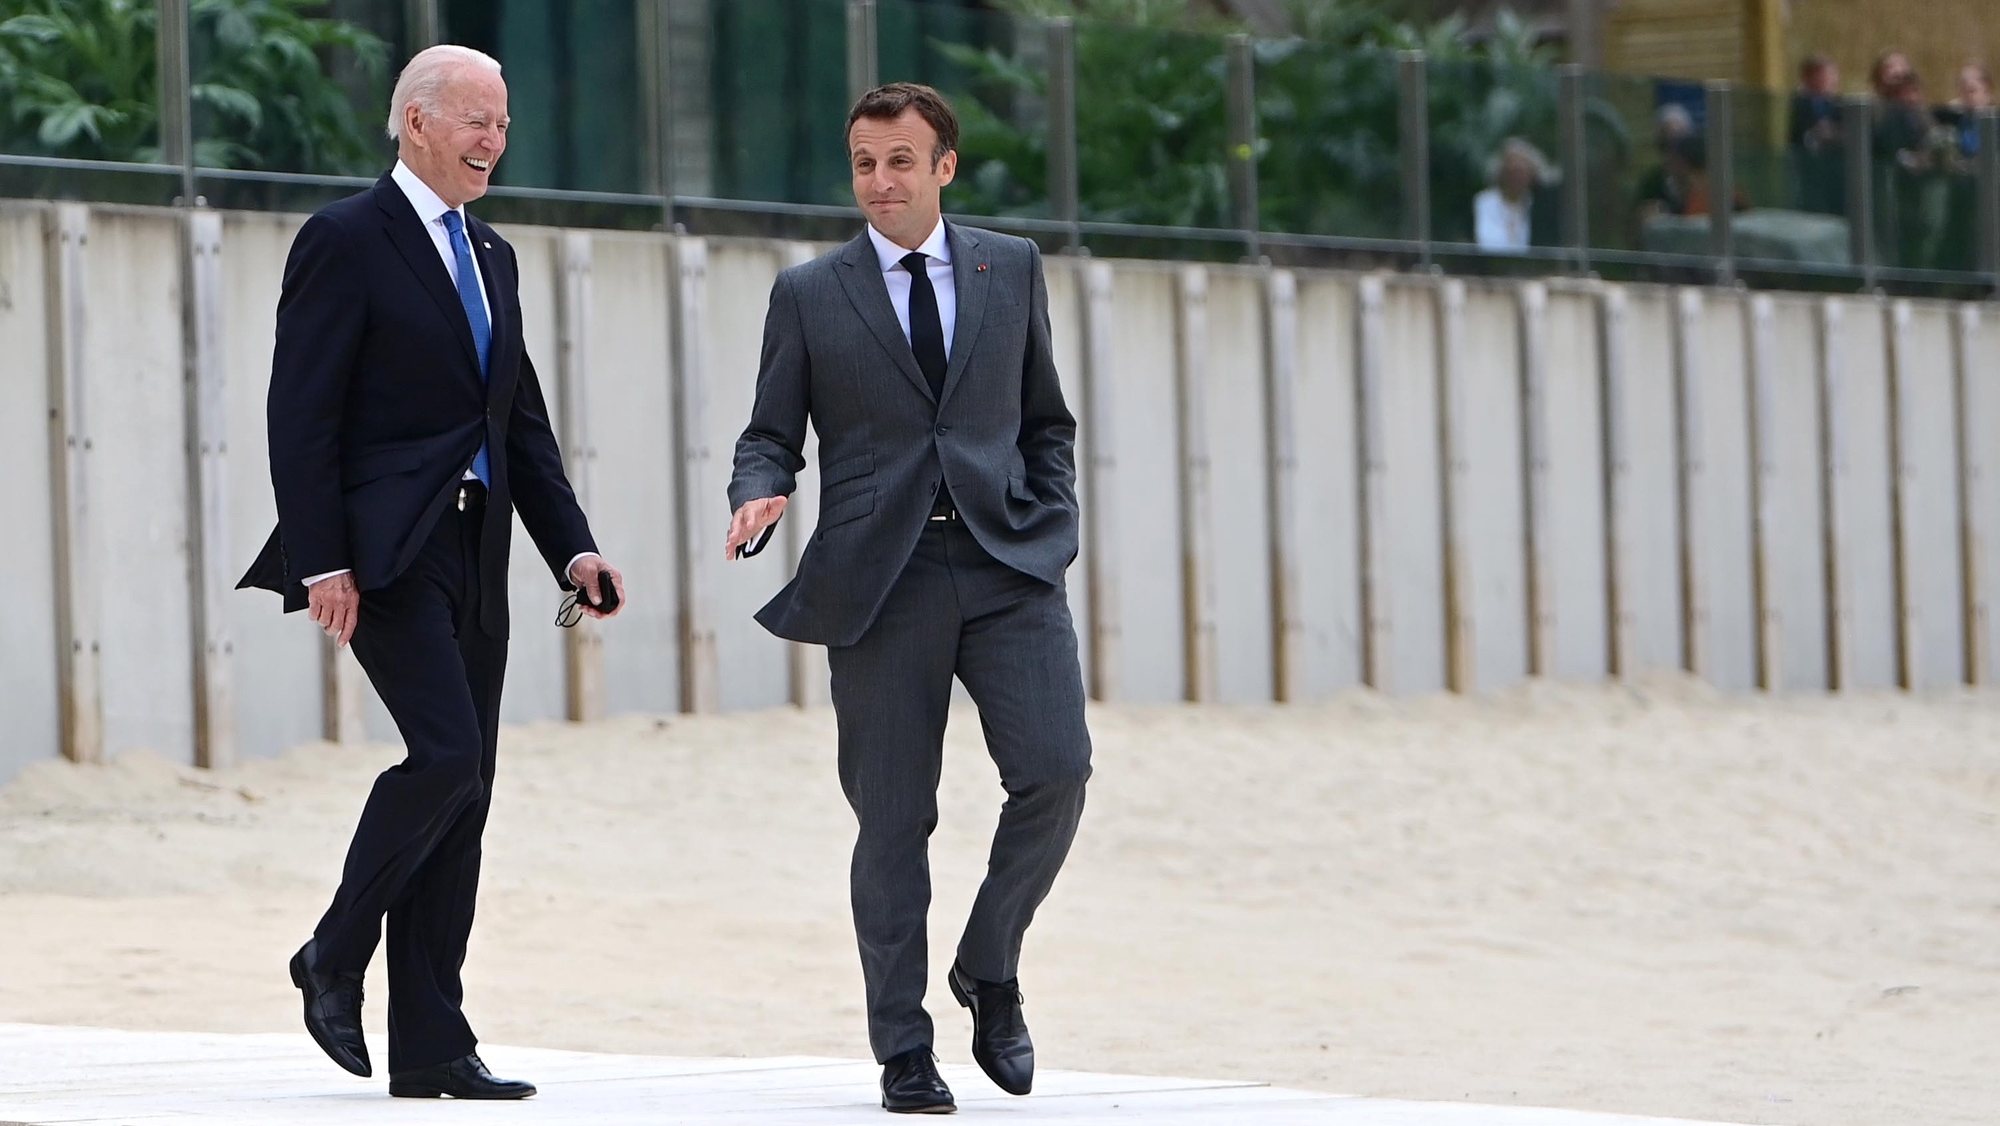 epa09262534 US President Joe Biden (L) and France&#039;s President Emmanuel Macron (R) arrive at the family photo during the G7 Summit in Carbis Bay, Britain, 11 June 2021. Britain hosts the Group of Seven (G7) summit in Cornwall from 11 to 13 June 2021.  EPA/NEIL HALL/POOL